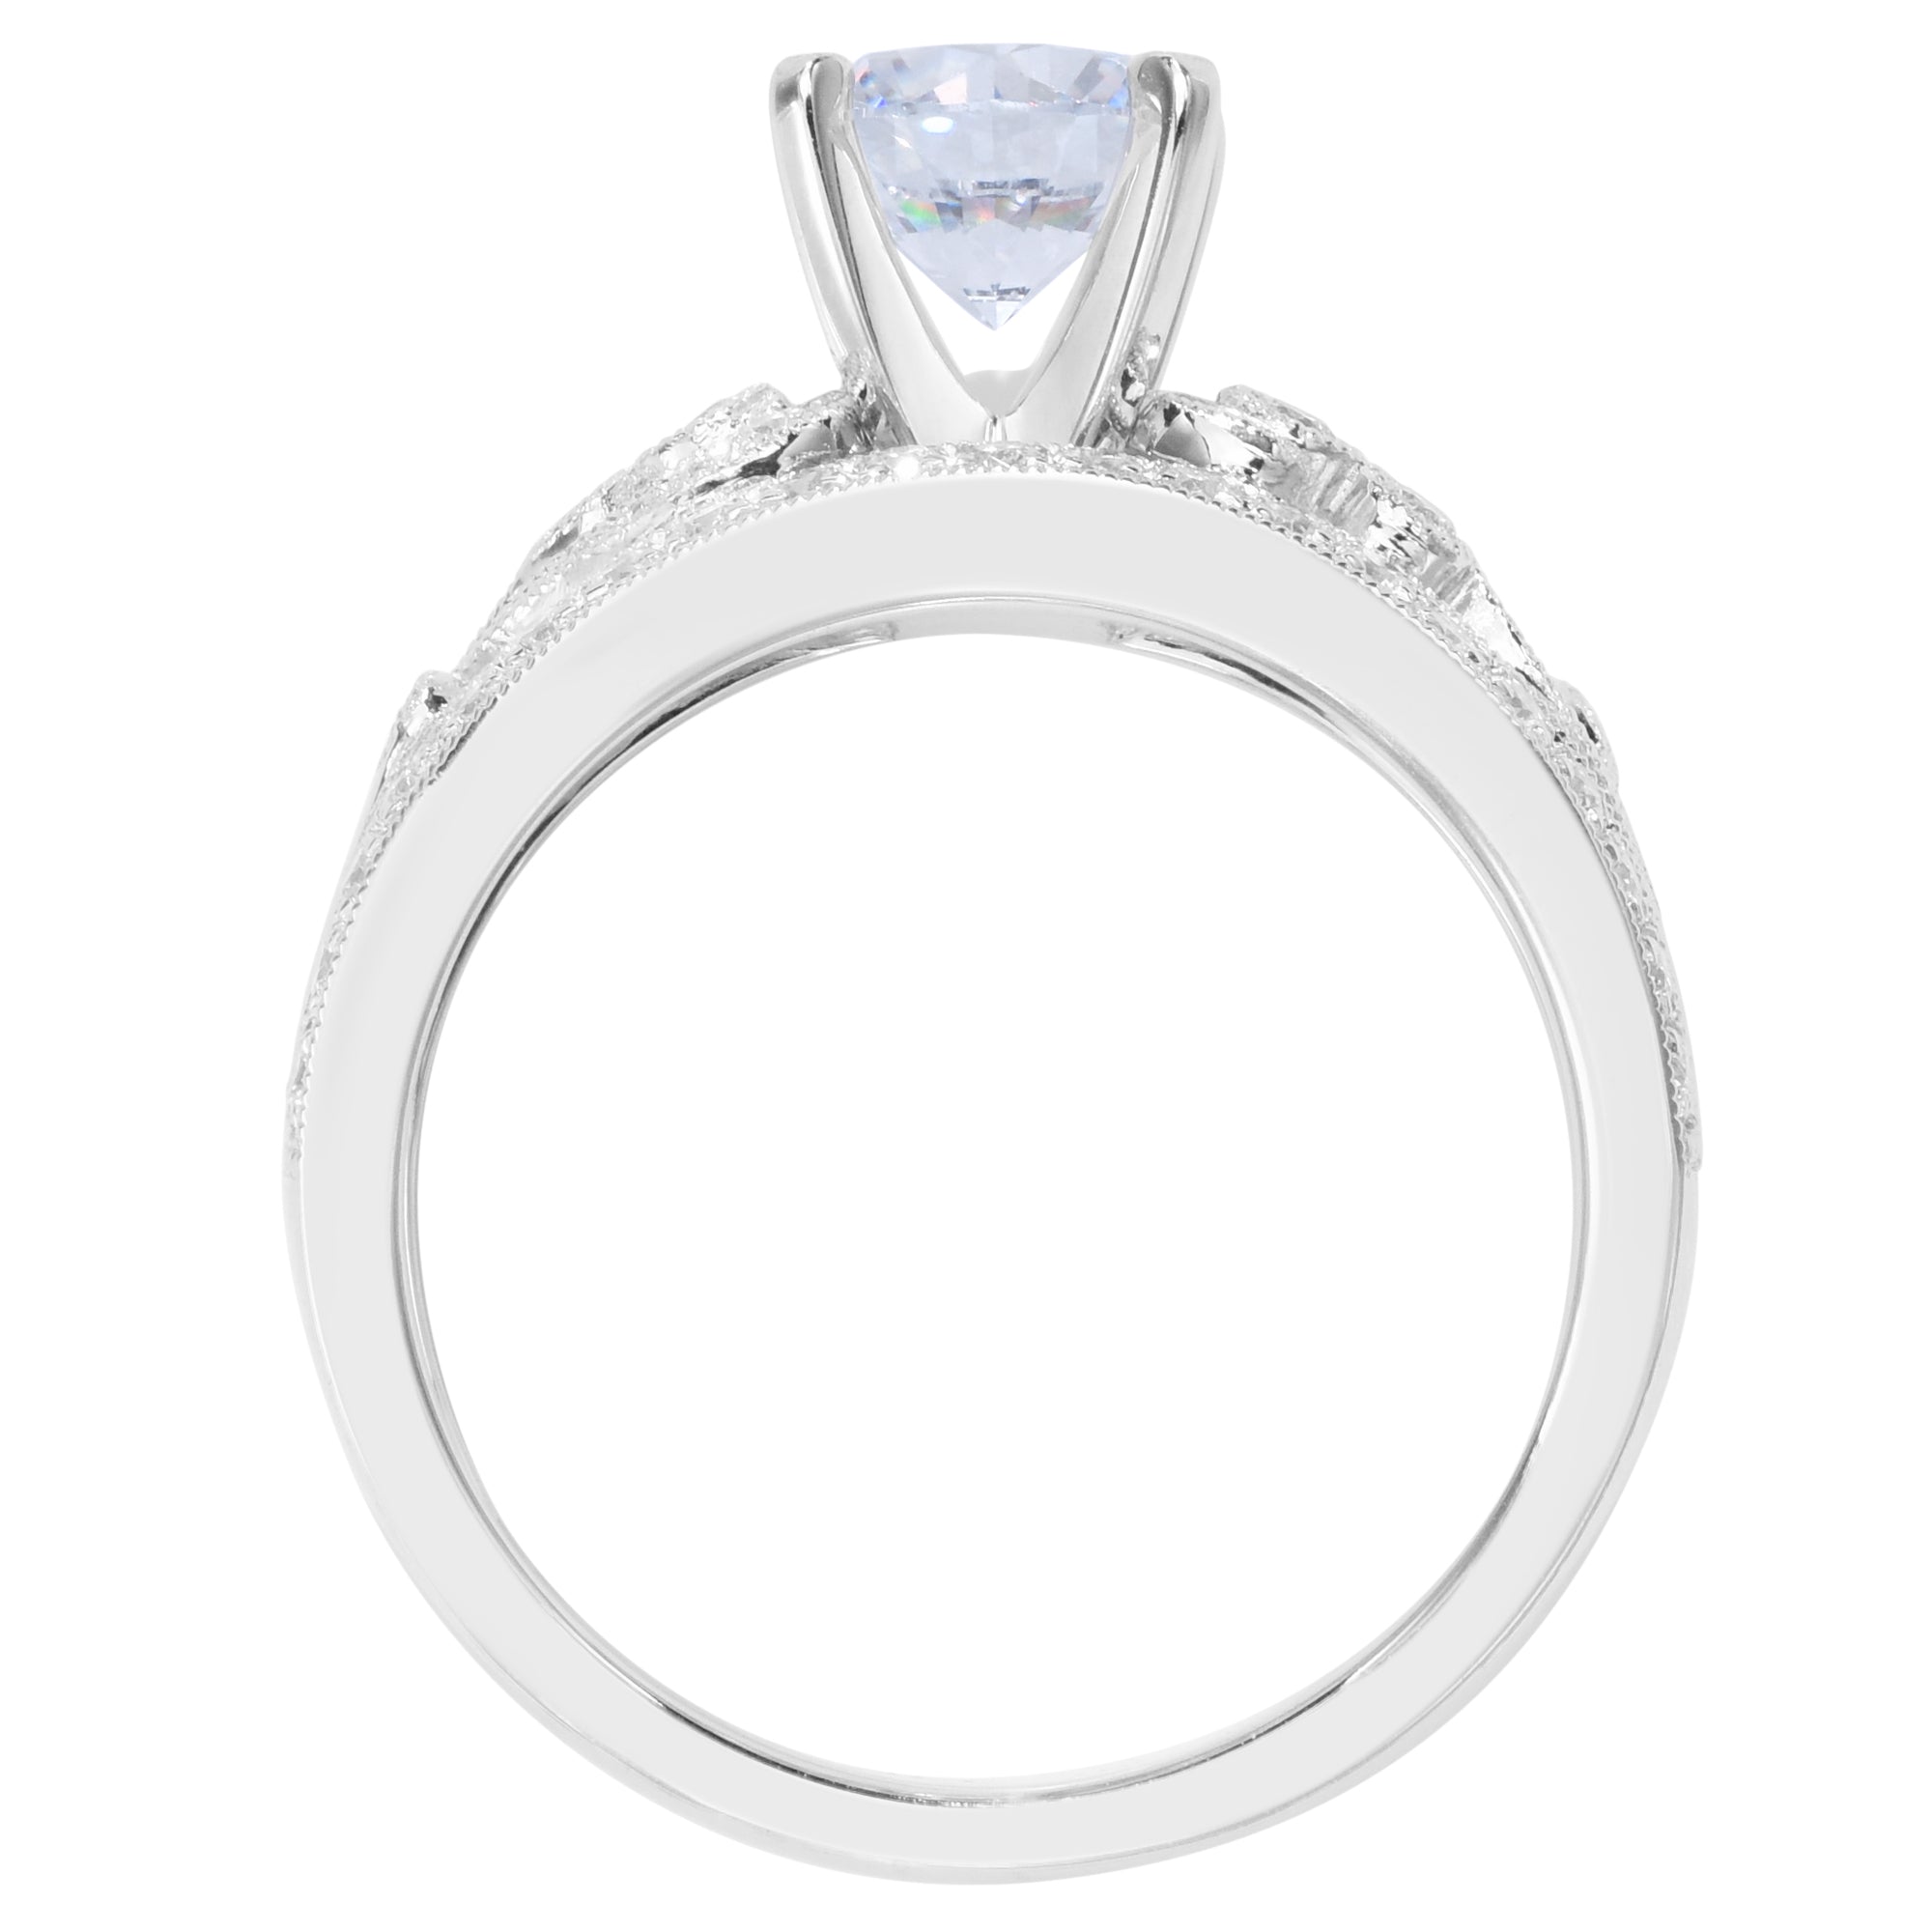 Daydream Diamond Engagement Ring Setting in 14kt White Gold (3/8ct tw)